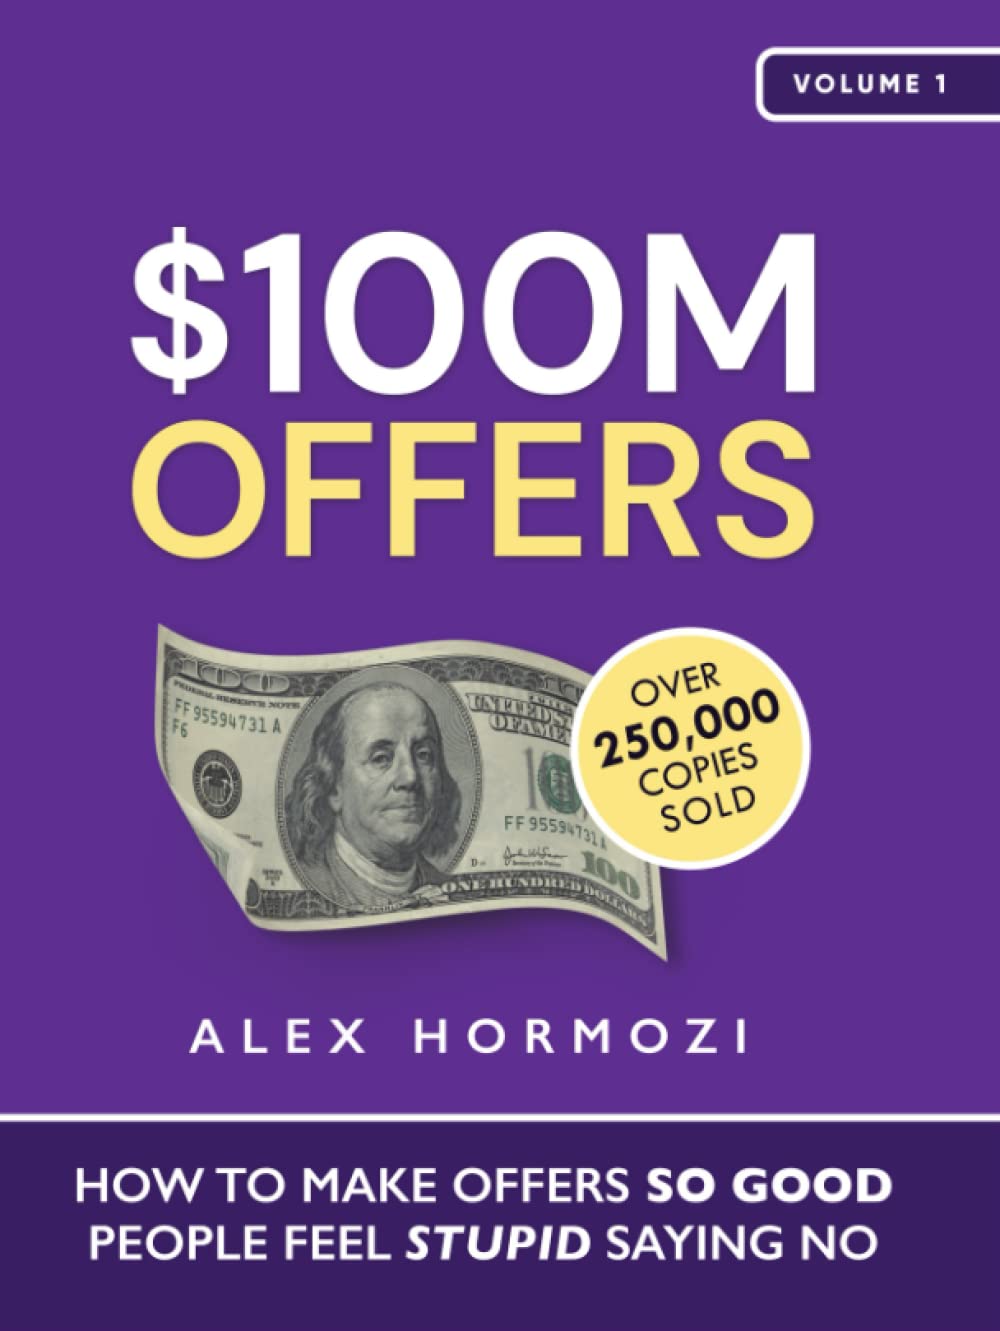 $100M OFFERS Amazon book cover